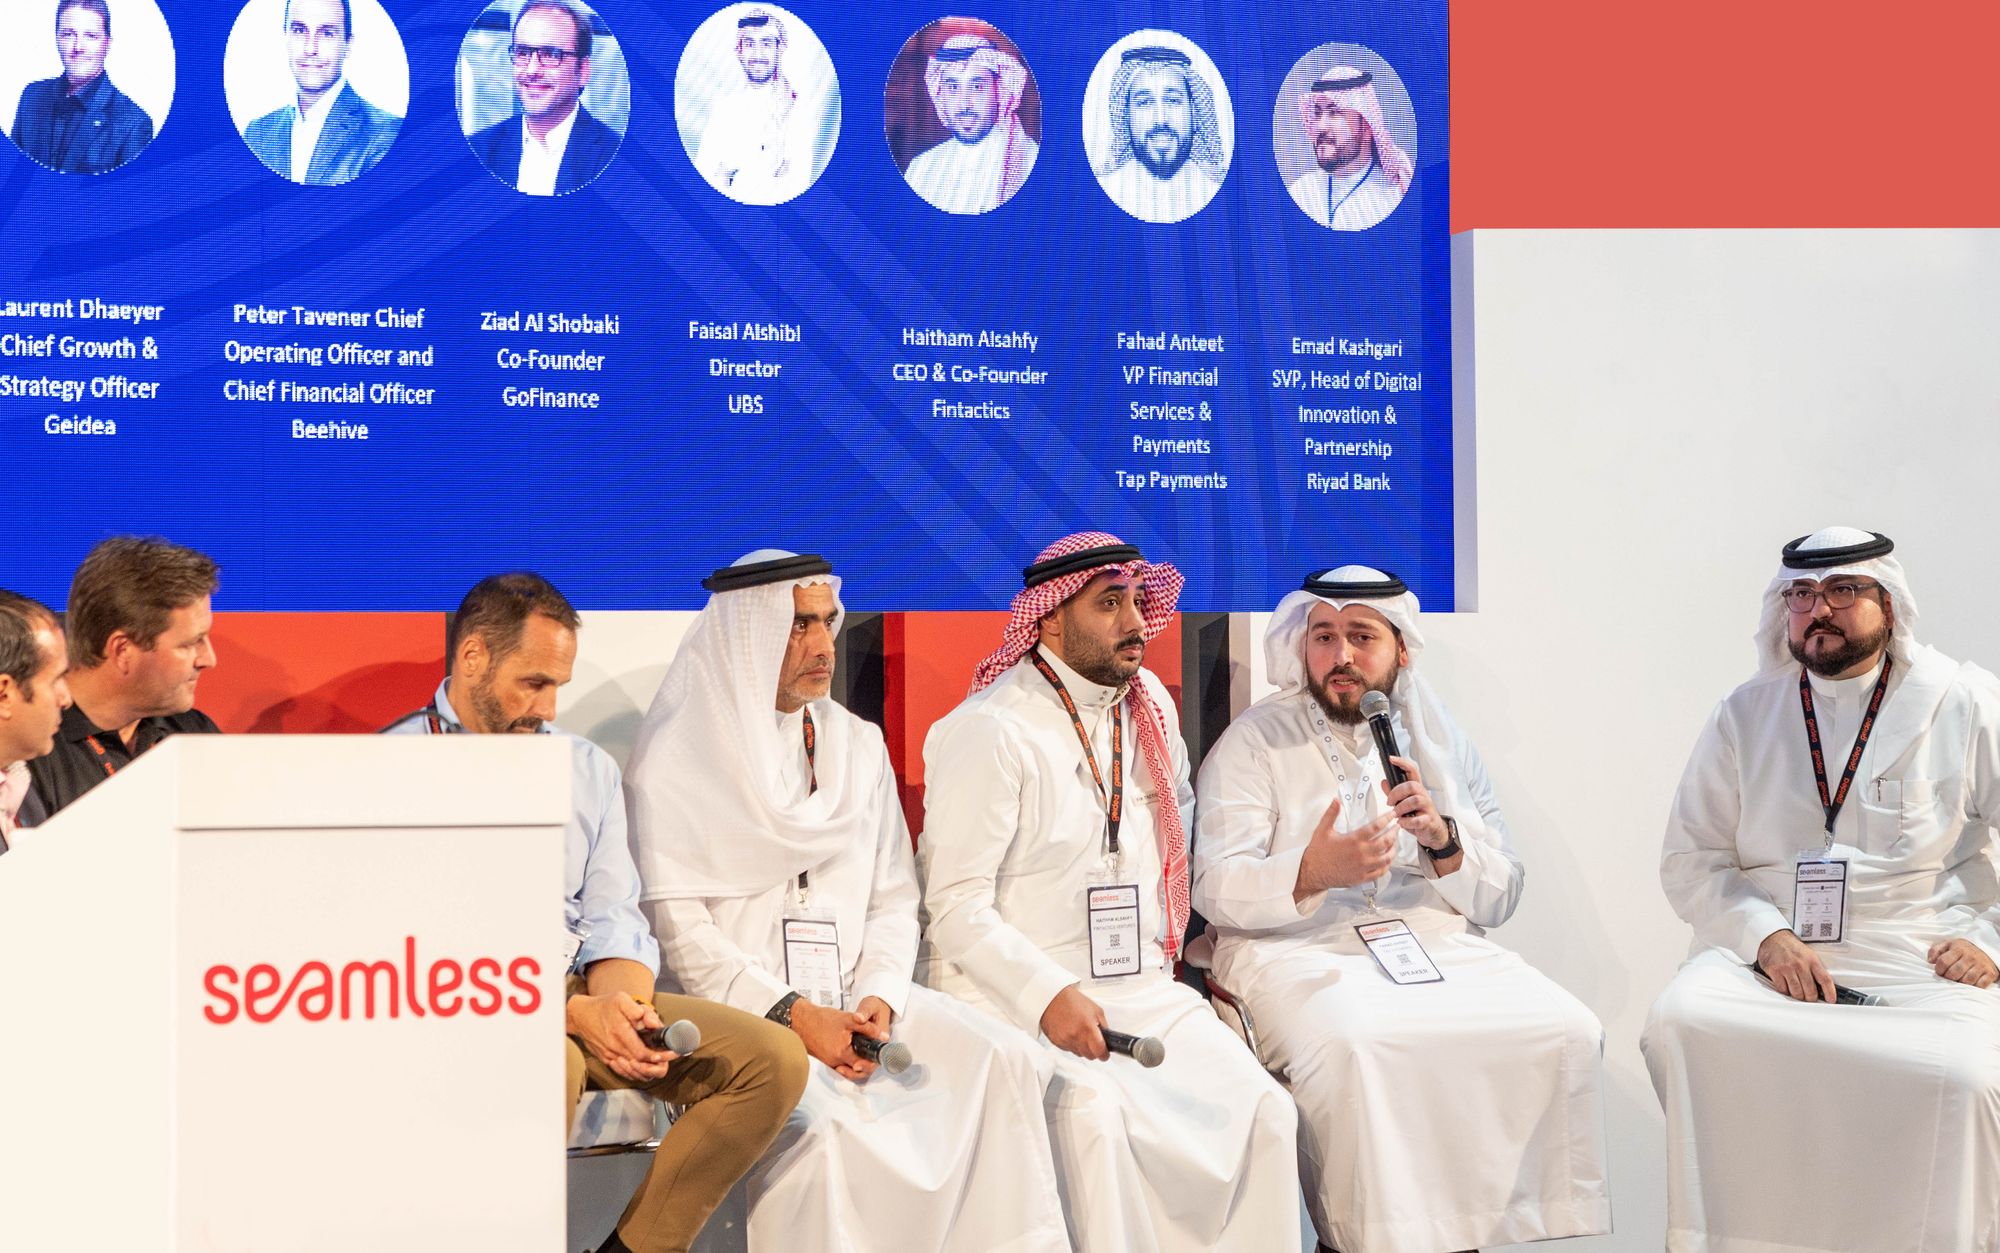 Fahad AlAnteet, our VP of Financial Services & Payments speaking at #SeamlessKSA